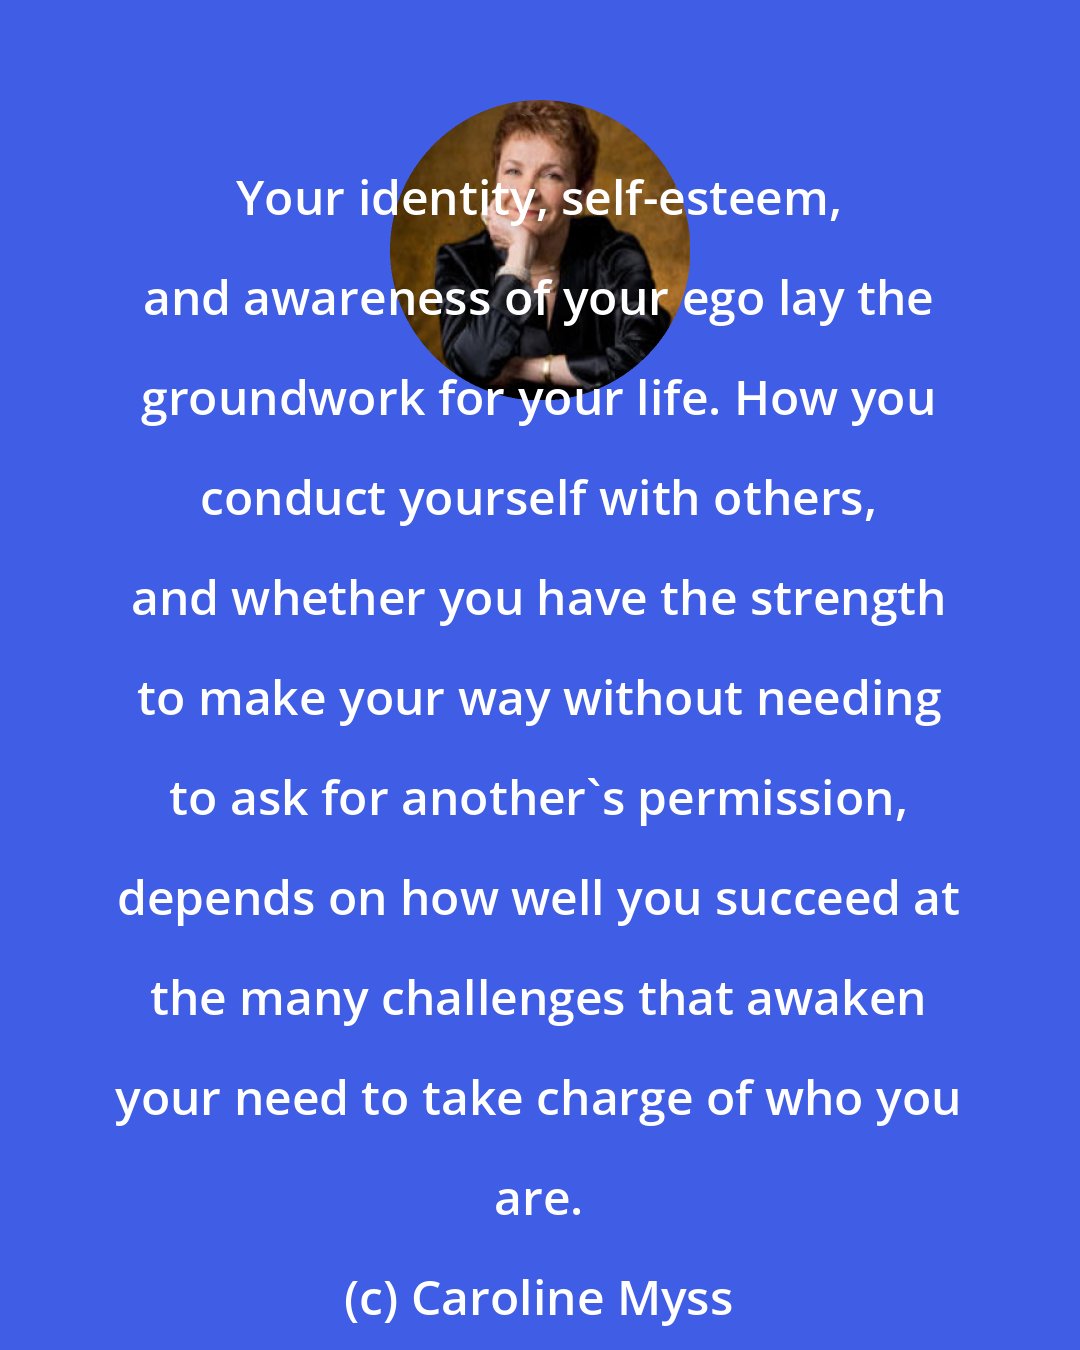 Caroline Myss: Your identity, self-esteem, and awareness of your ego lay the groundwork for your life. How you conduct yourself with others, and whether you have the strength to make your way without needing to ask for another's permission, depends on how well you succeed at the many challenges that awaken your need to take charge of who you are.